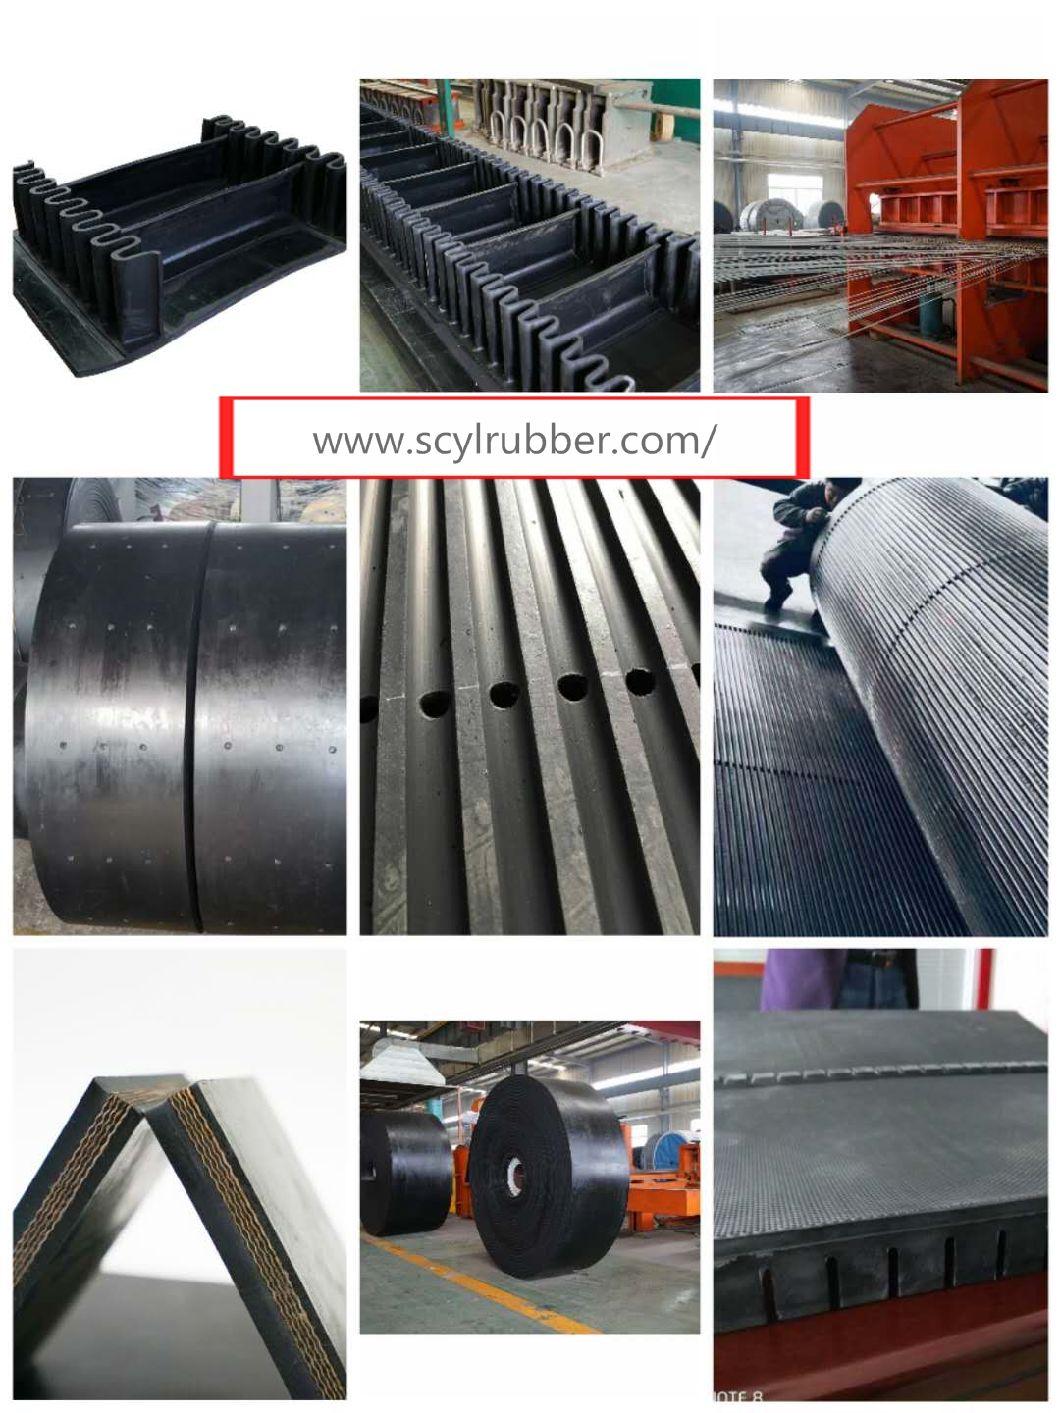 Steel Reinforced Rubber Conveyor Belting with High Tensile Strength for Power Plants